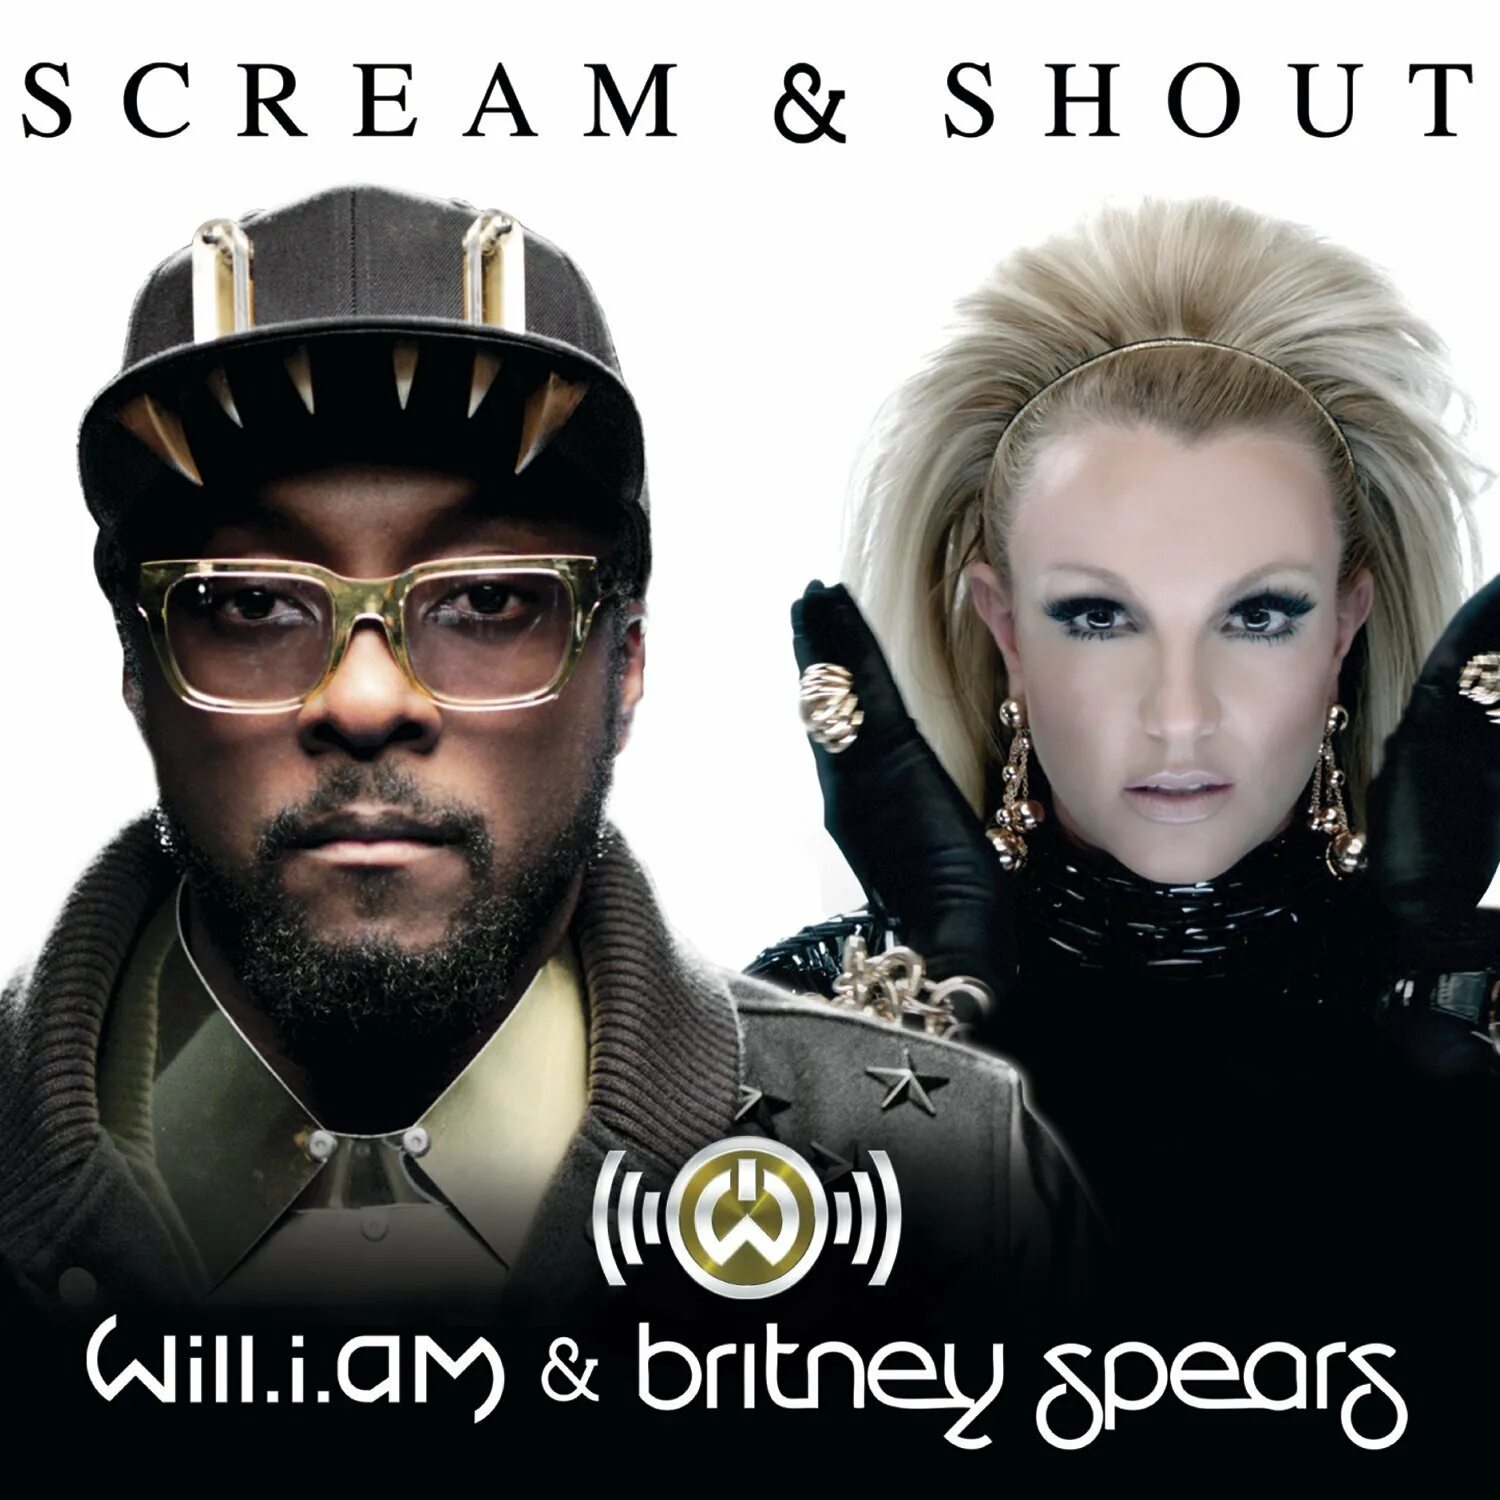 Screaming feat. Will.i.am - Scream & Shout ft. Britney Spears. Britney Spears William. Бритни Спирс Scream and Shout. Scream and should Britney Spears обложка.